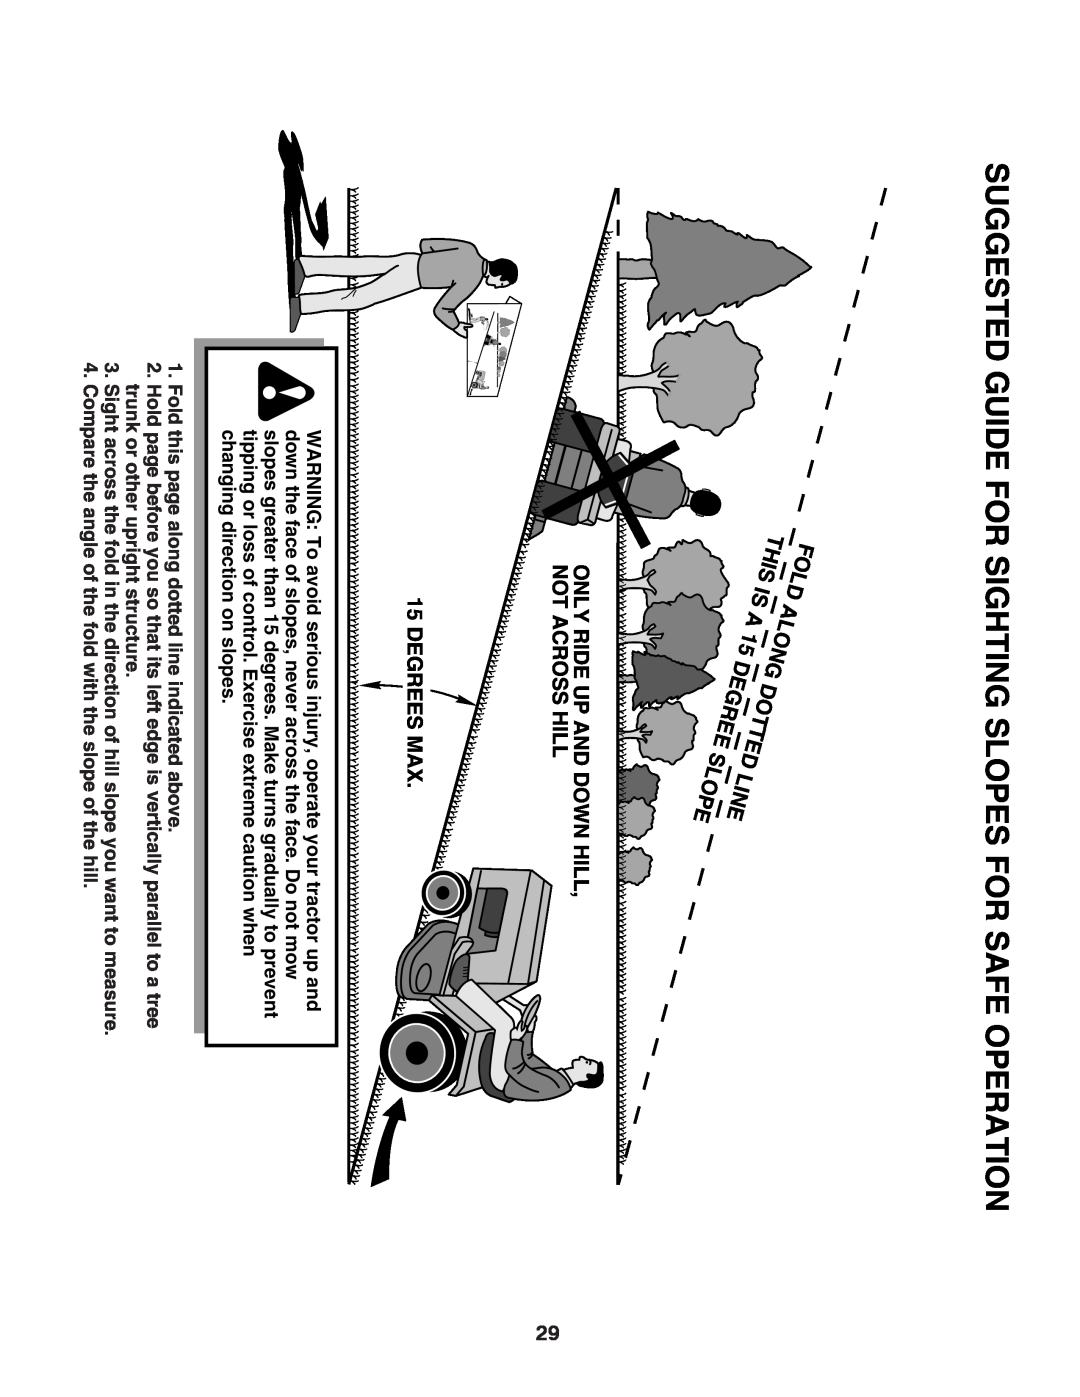 Poulan 532 40 36-87 manual Suggested Guide For Sighting Slopes For Safe Operation 